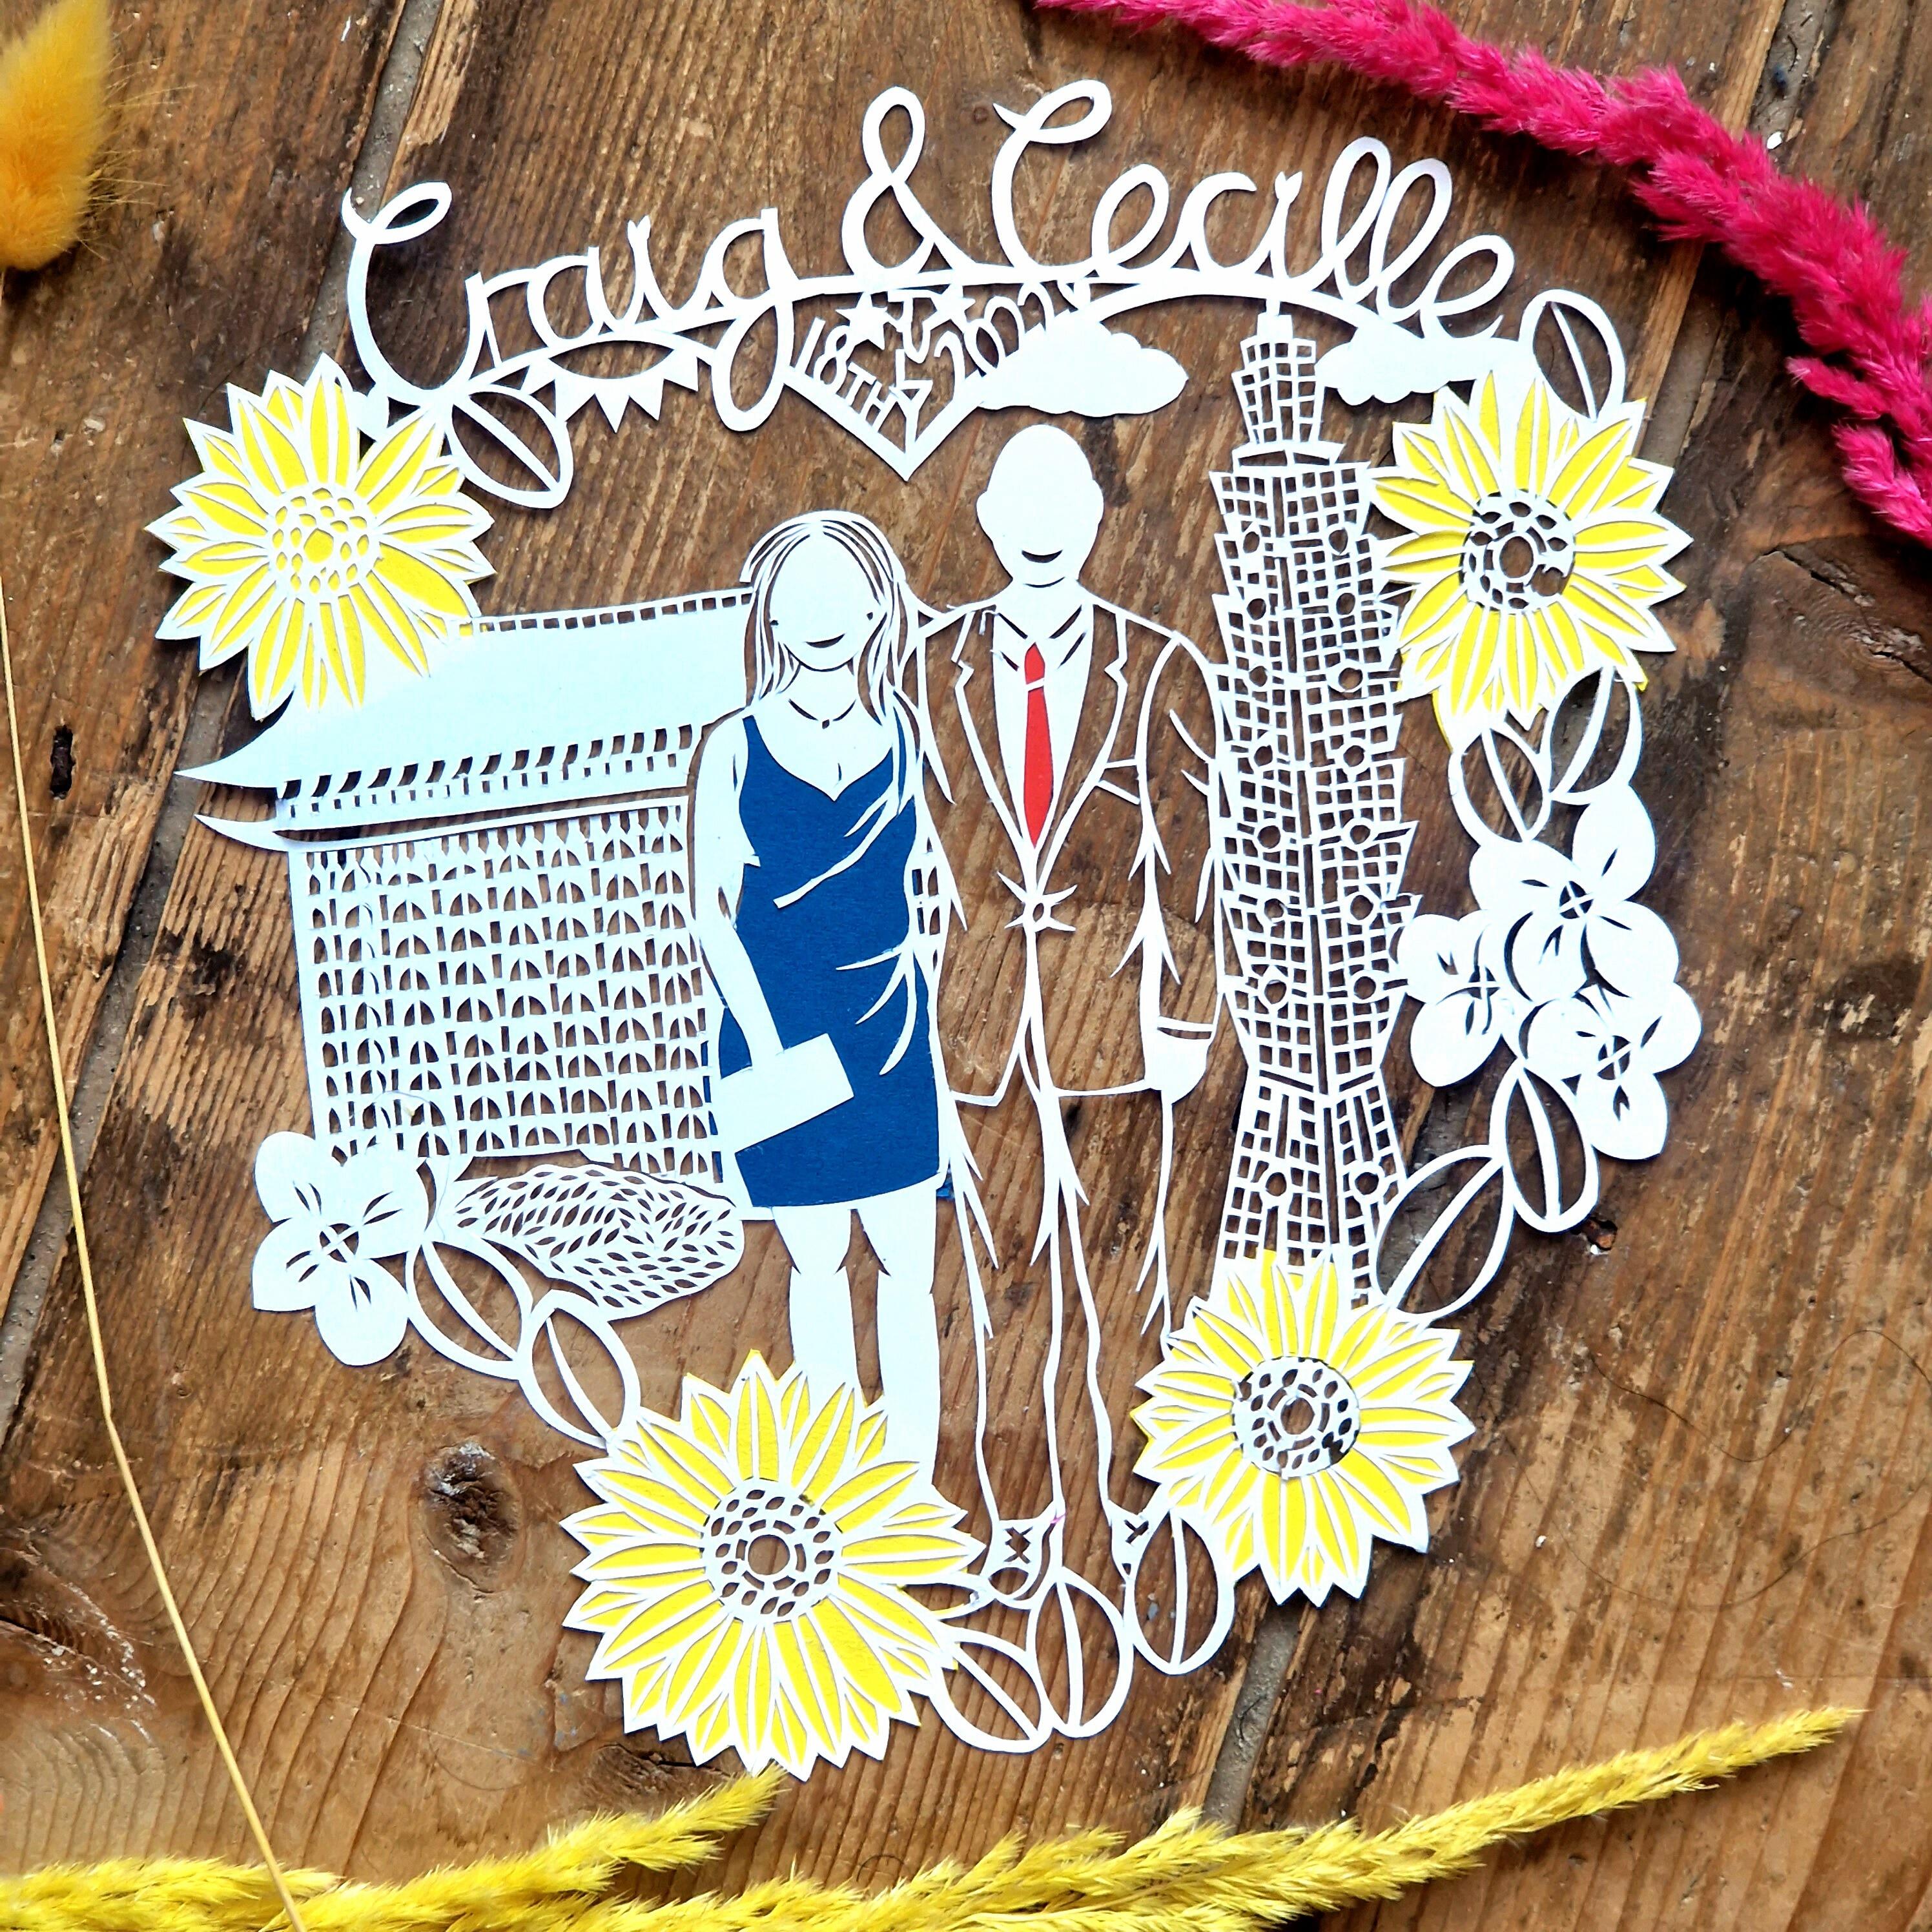 Wedding paper cut featuring bride and groom at at forest wedding, with flowers around the outside